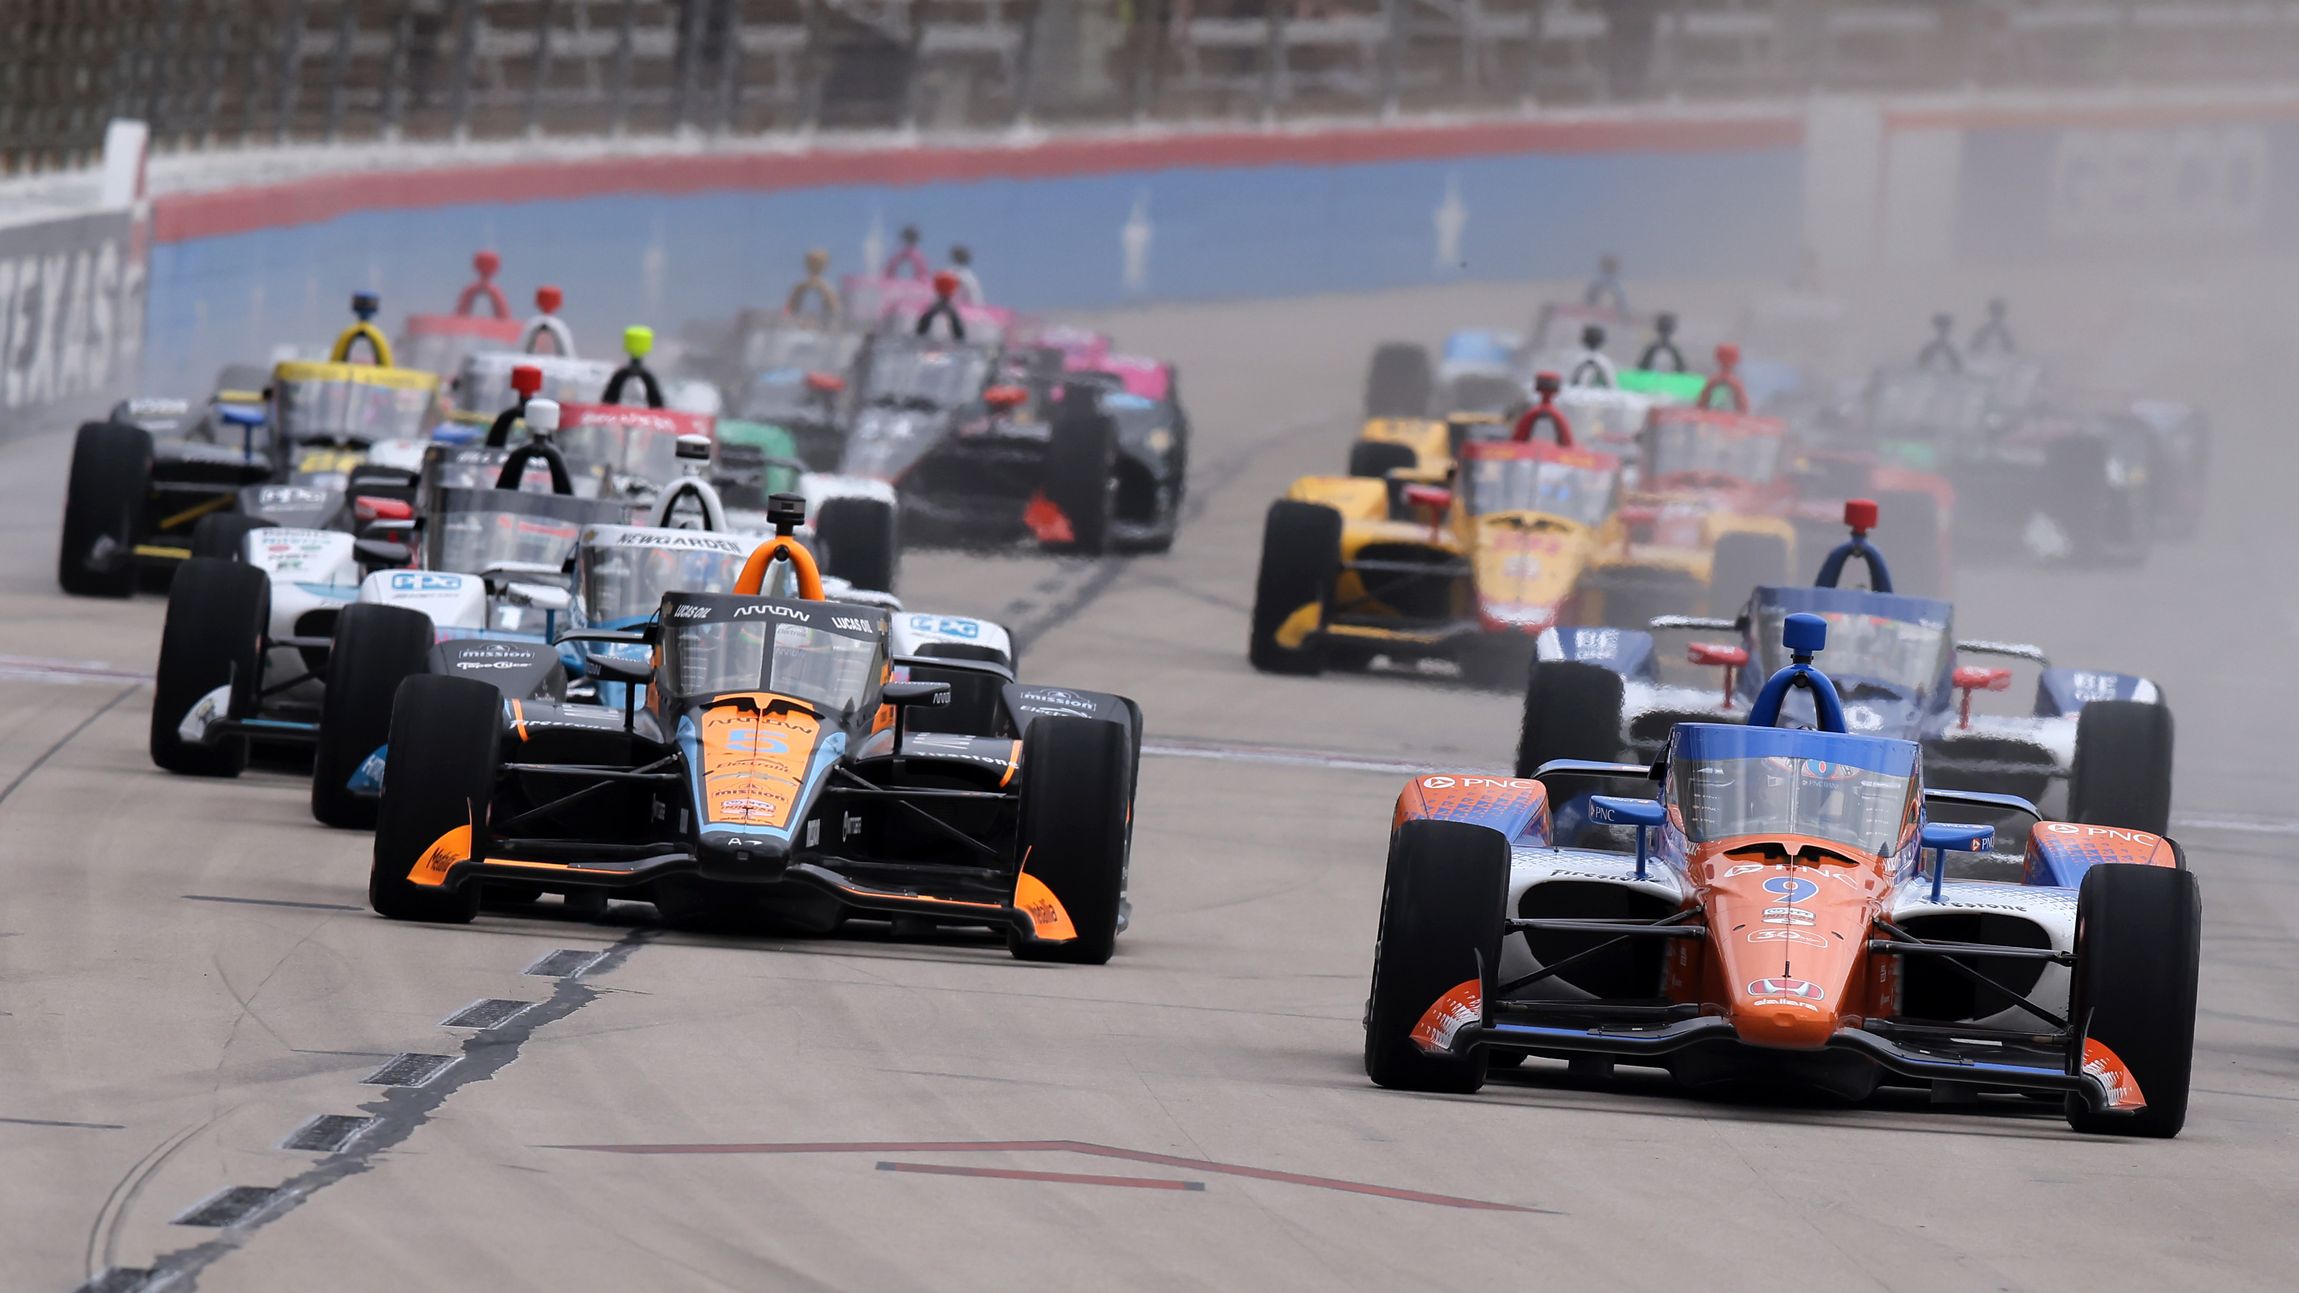 The start of an IndyCar race led by Felix Rosenqvist at Texas Motor Speedway.